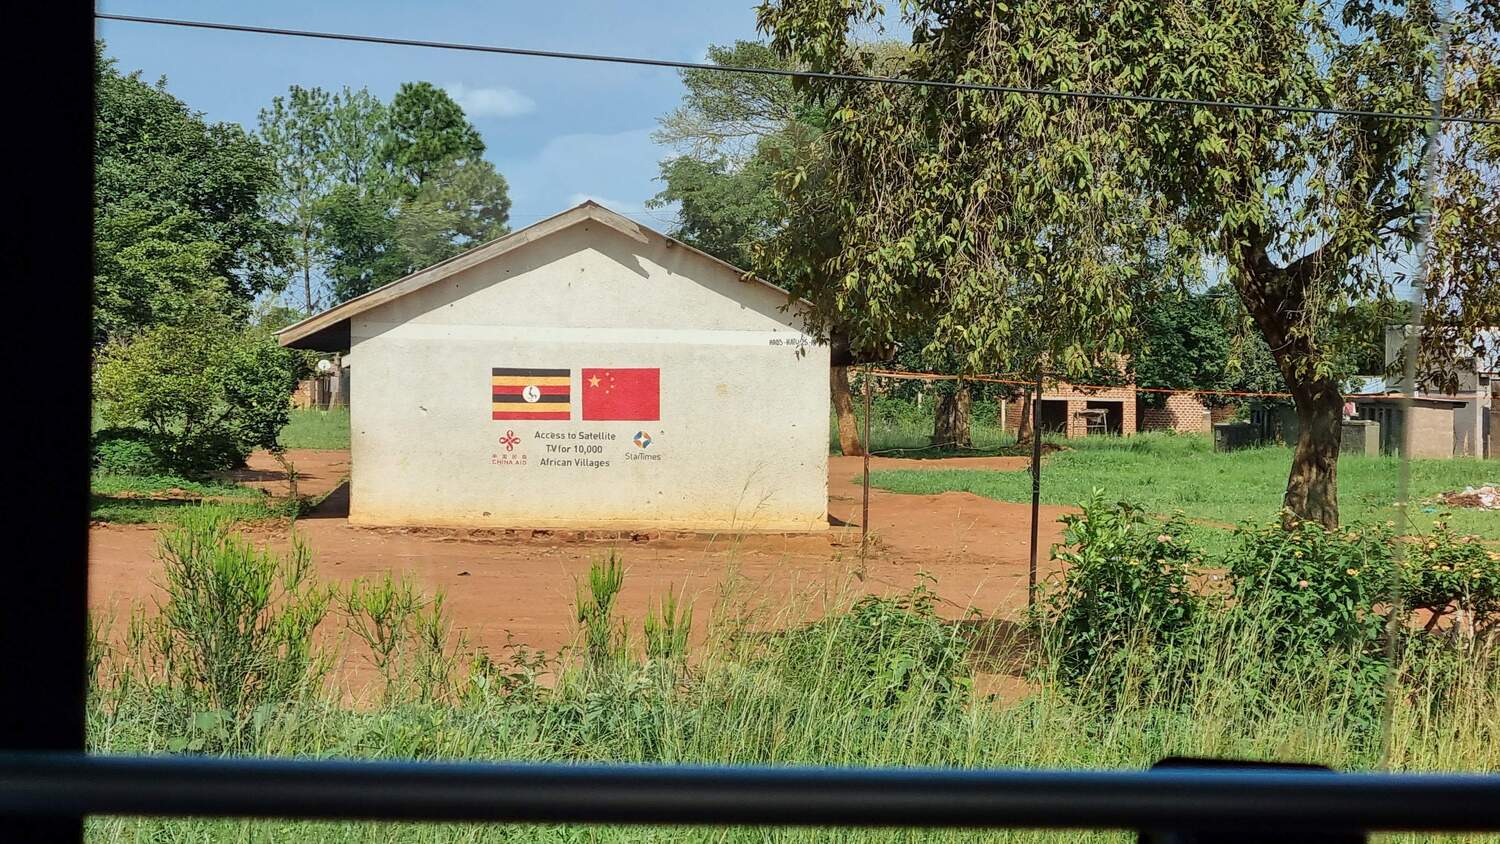 Advertisement of a Chinese satellite television development project in Uganda